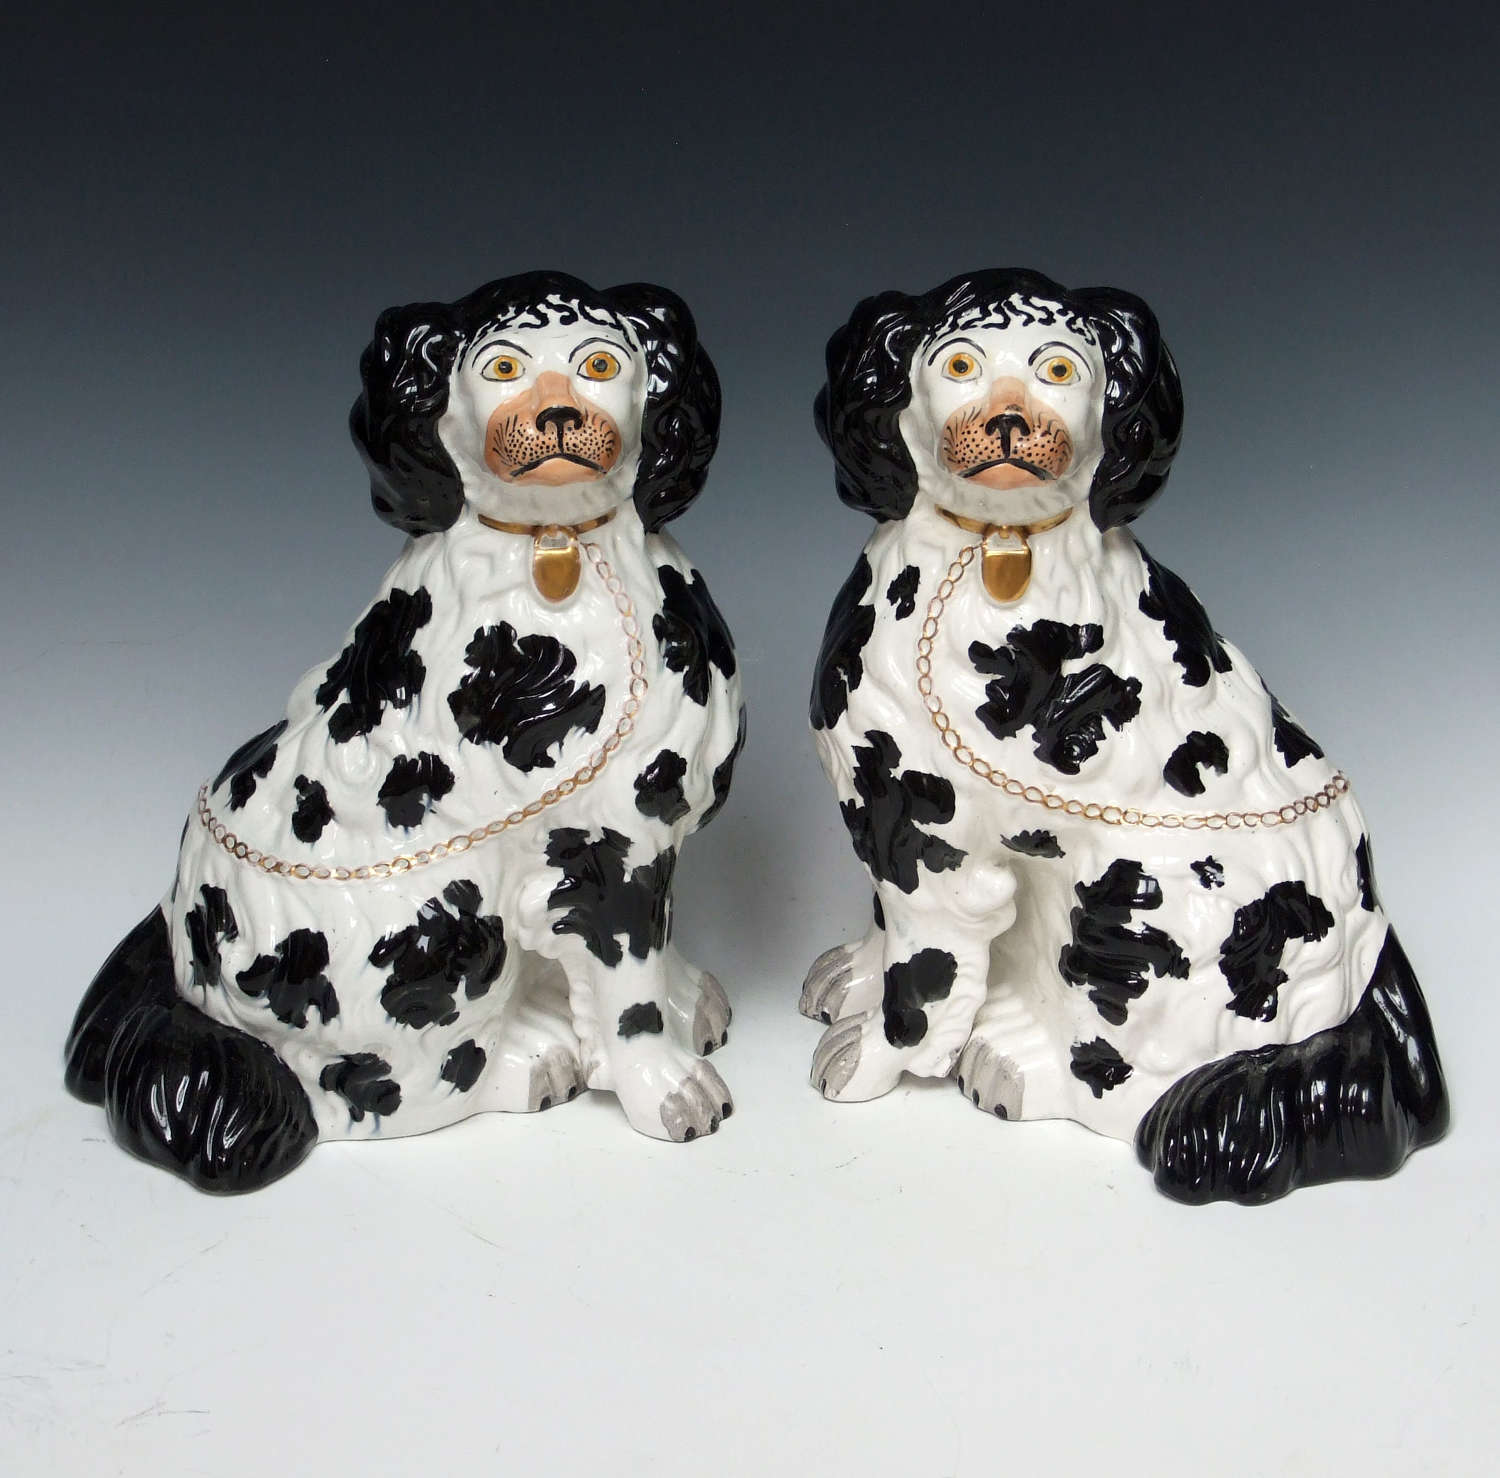 Superb pair of early large 'chubby' Staffordshire spaniel figures